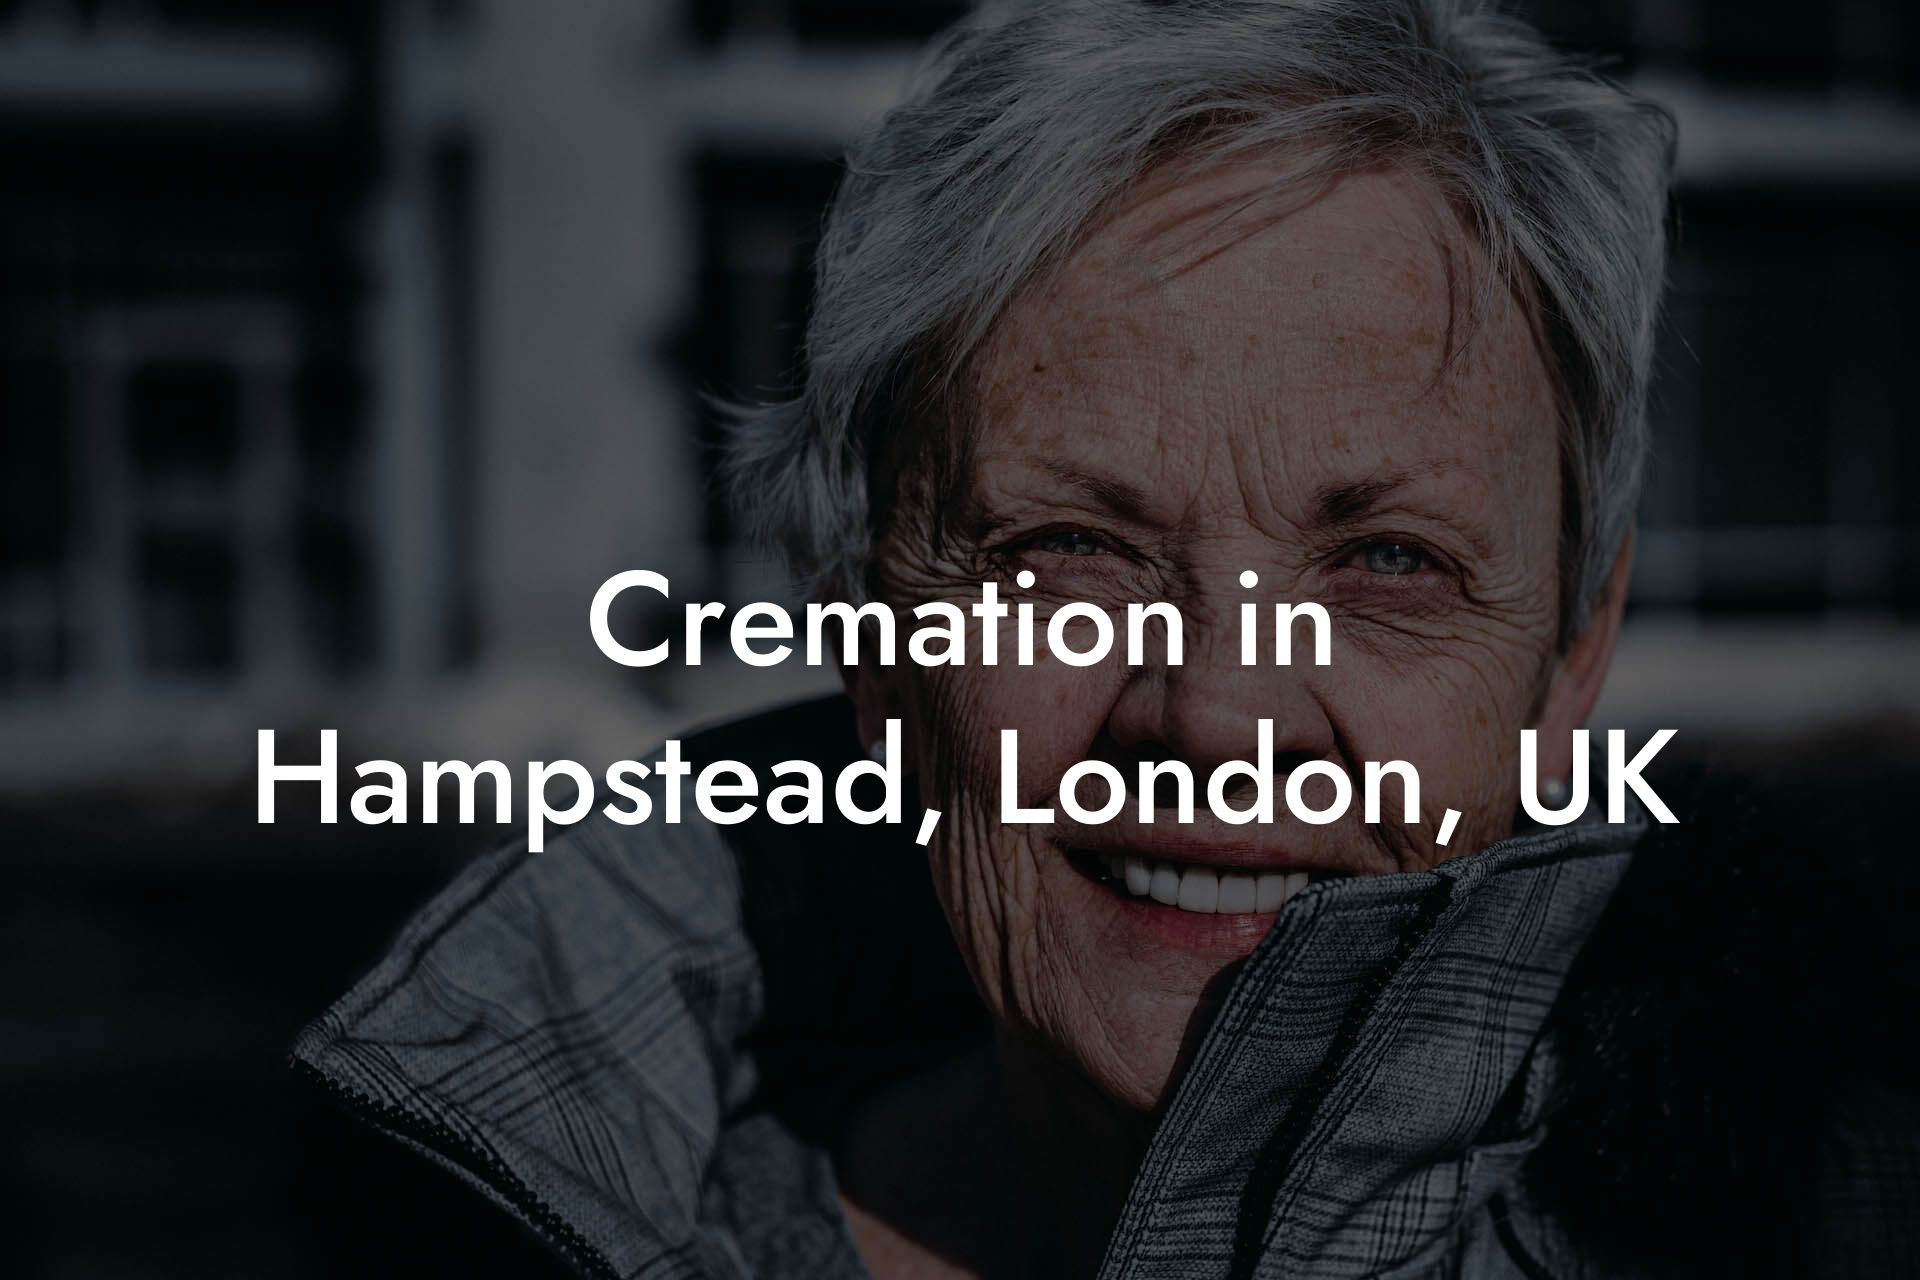 Cremation in Hampstead, London, UK